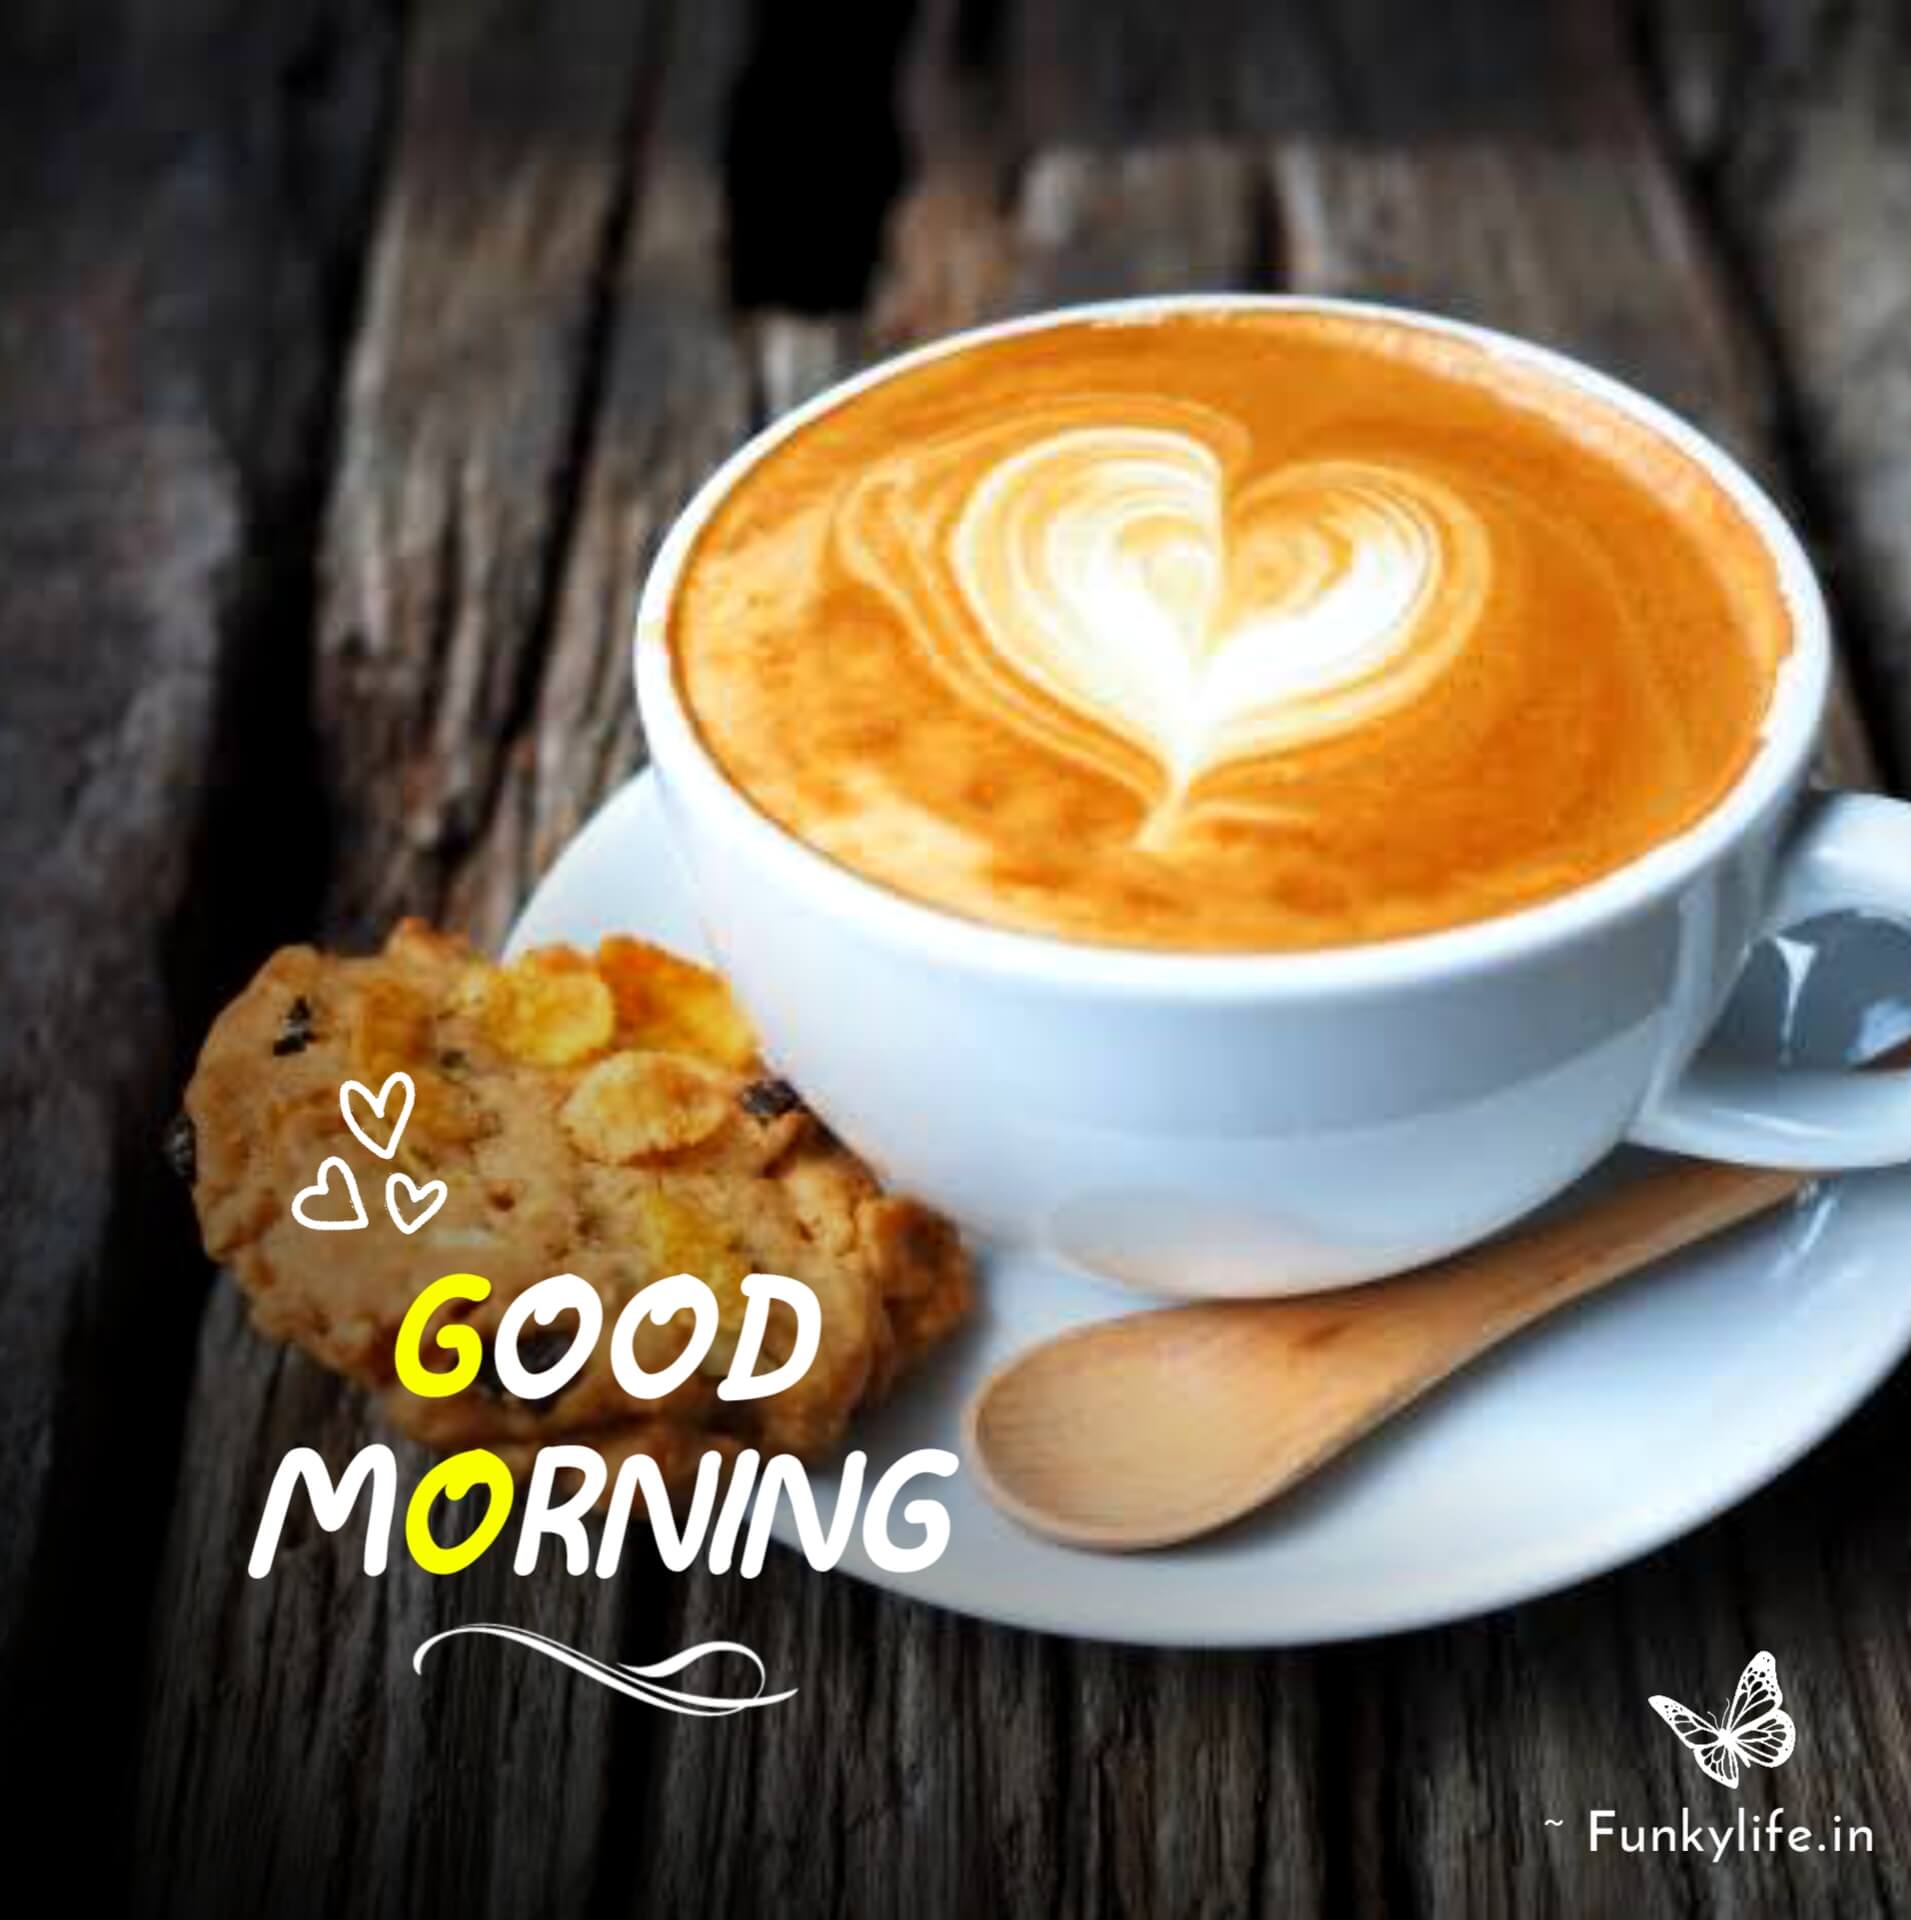 Heart Love Coffee Good Morning Images